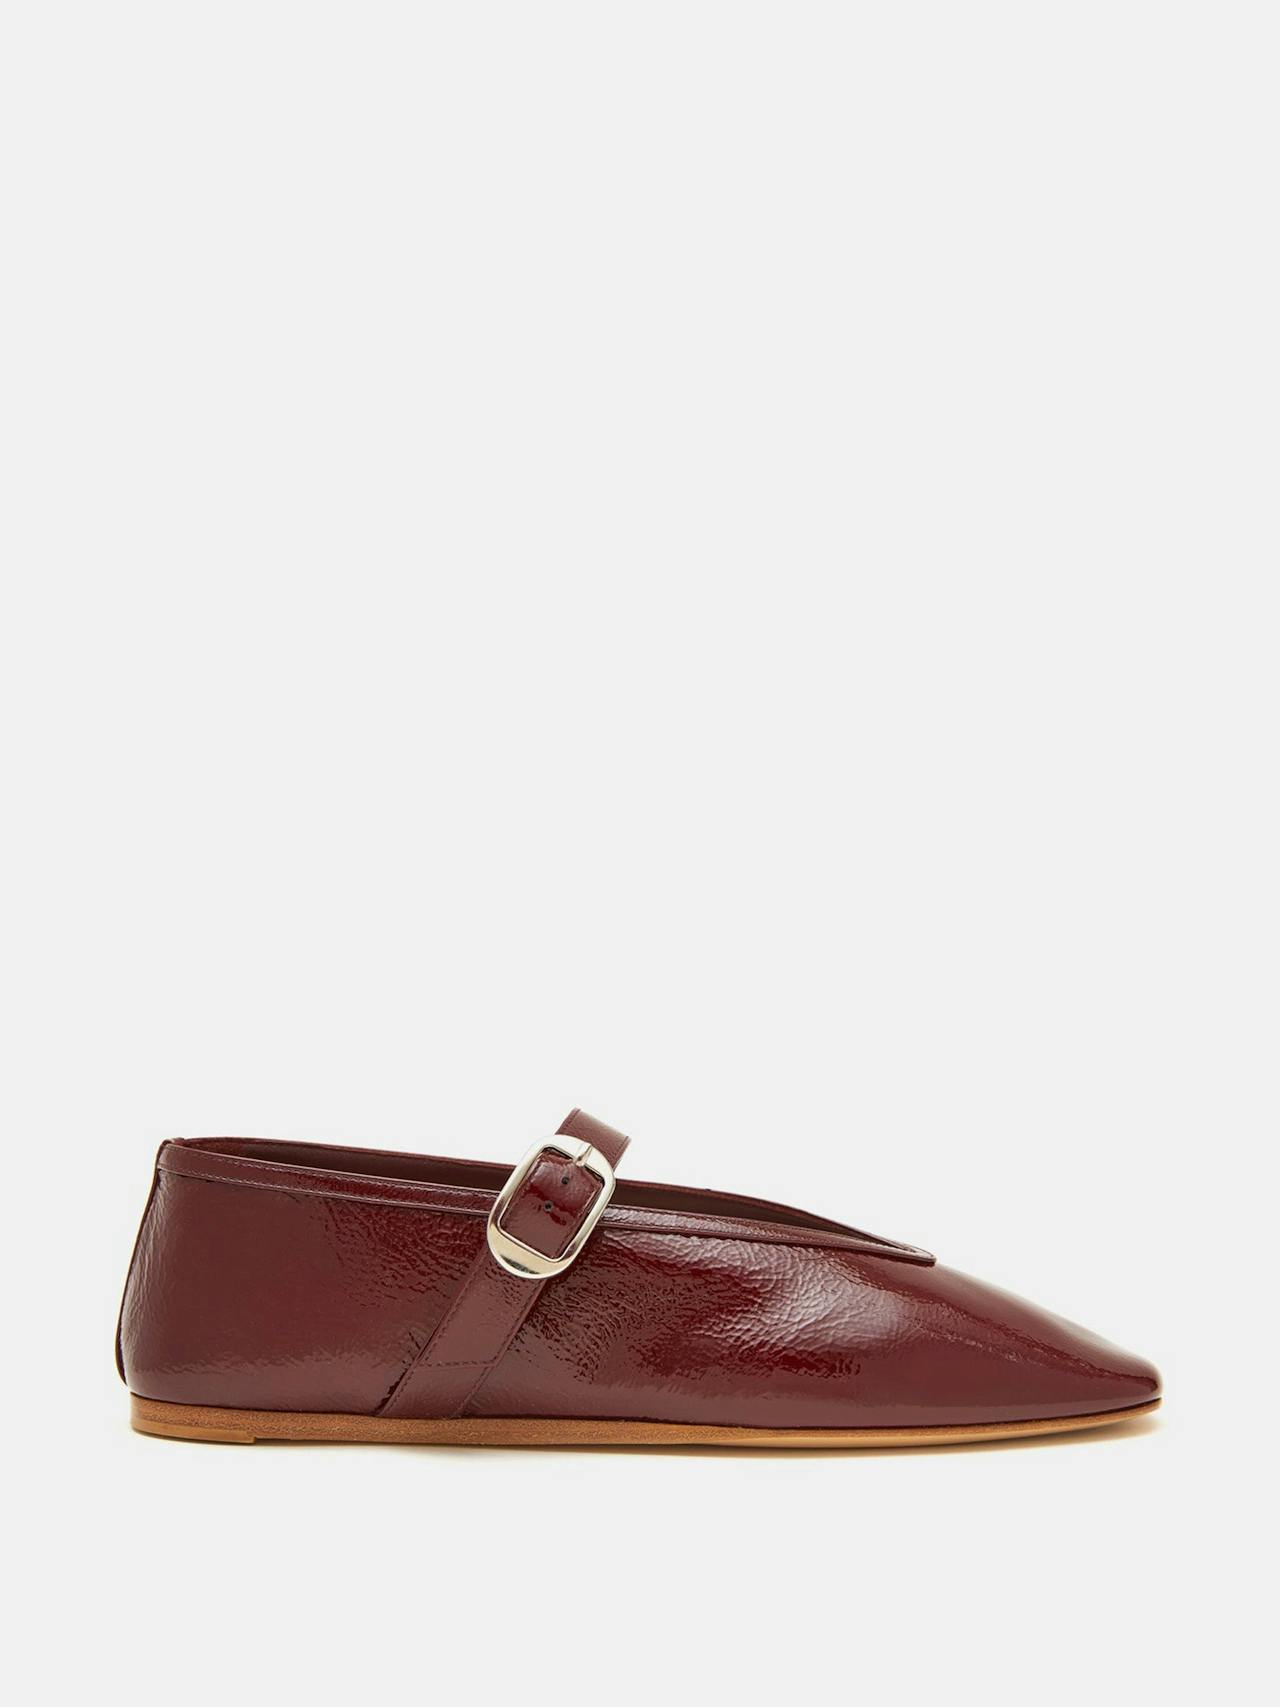 Oxblood red patent leather Stella slippers